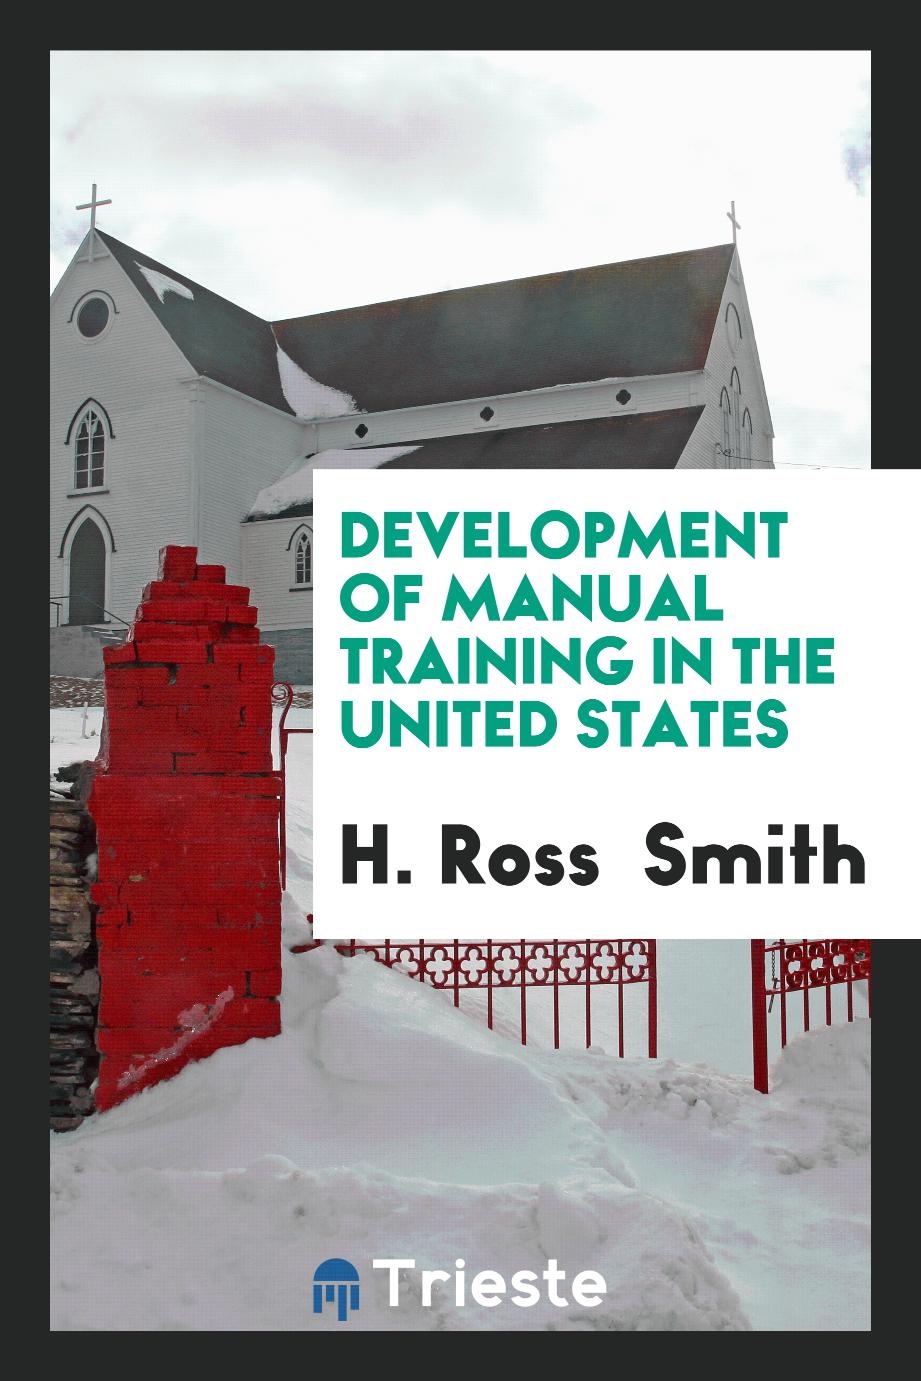 Development of Manual Training in the United States